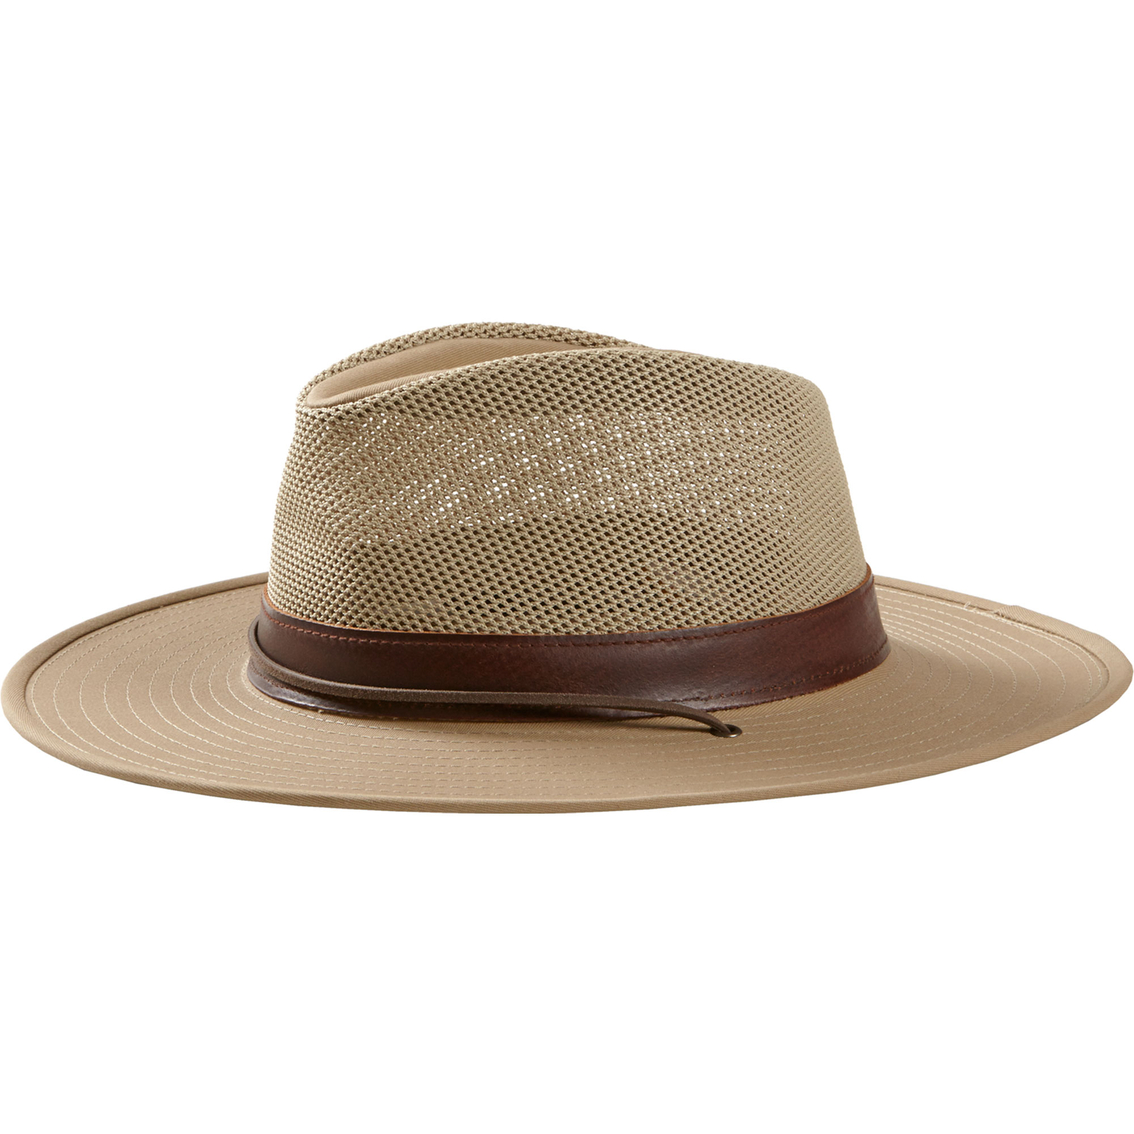 Henschel Hats Hiker Hat with Leather Band - Image 2 of 2